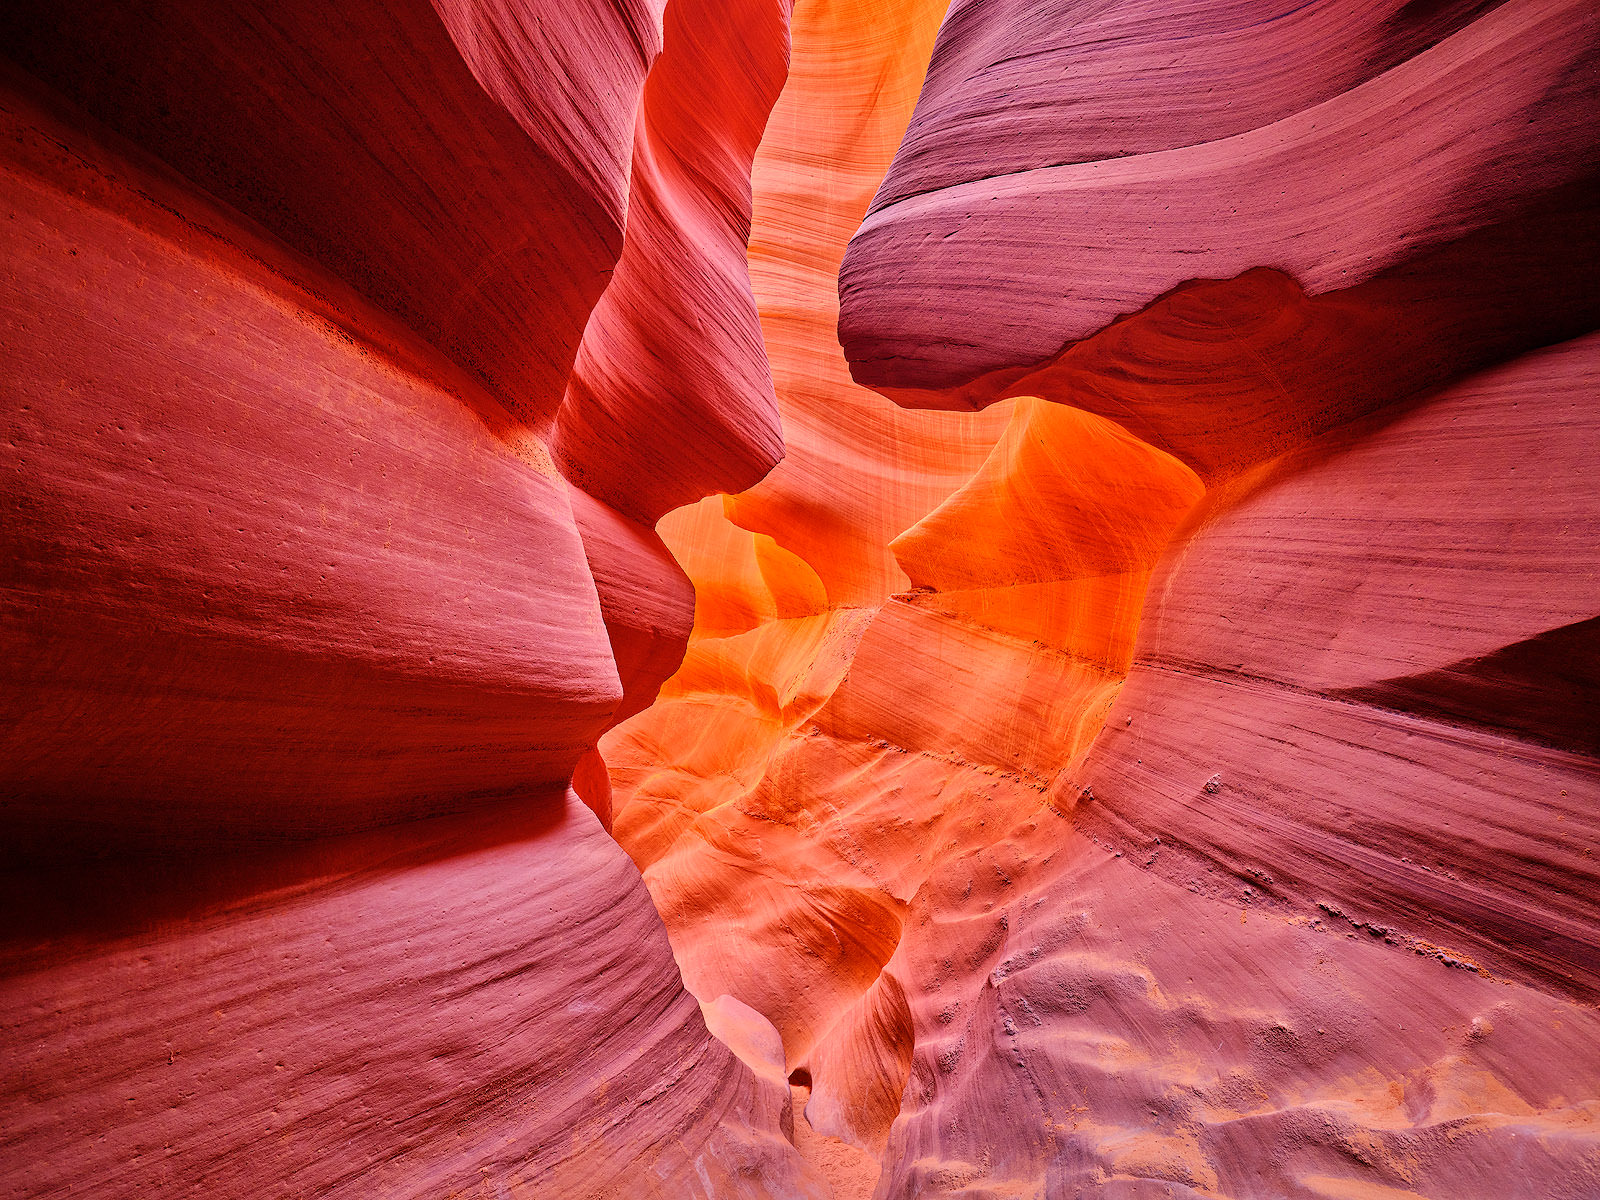 western fine art photography wall art from Lower Antelope Canyon in Page, Arizona.  Photographic prints for sale from artist Andrew Shoemaker